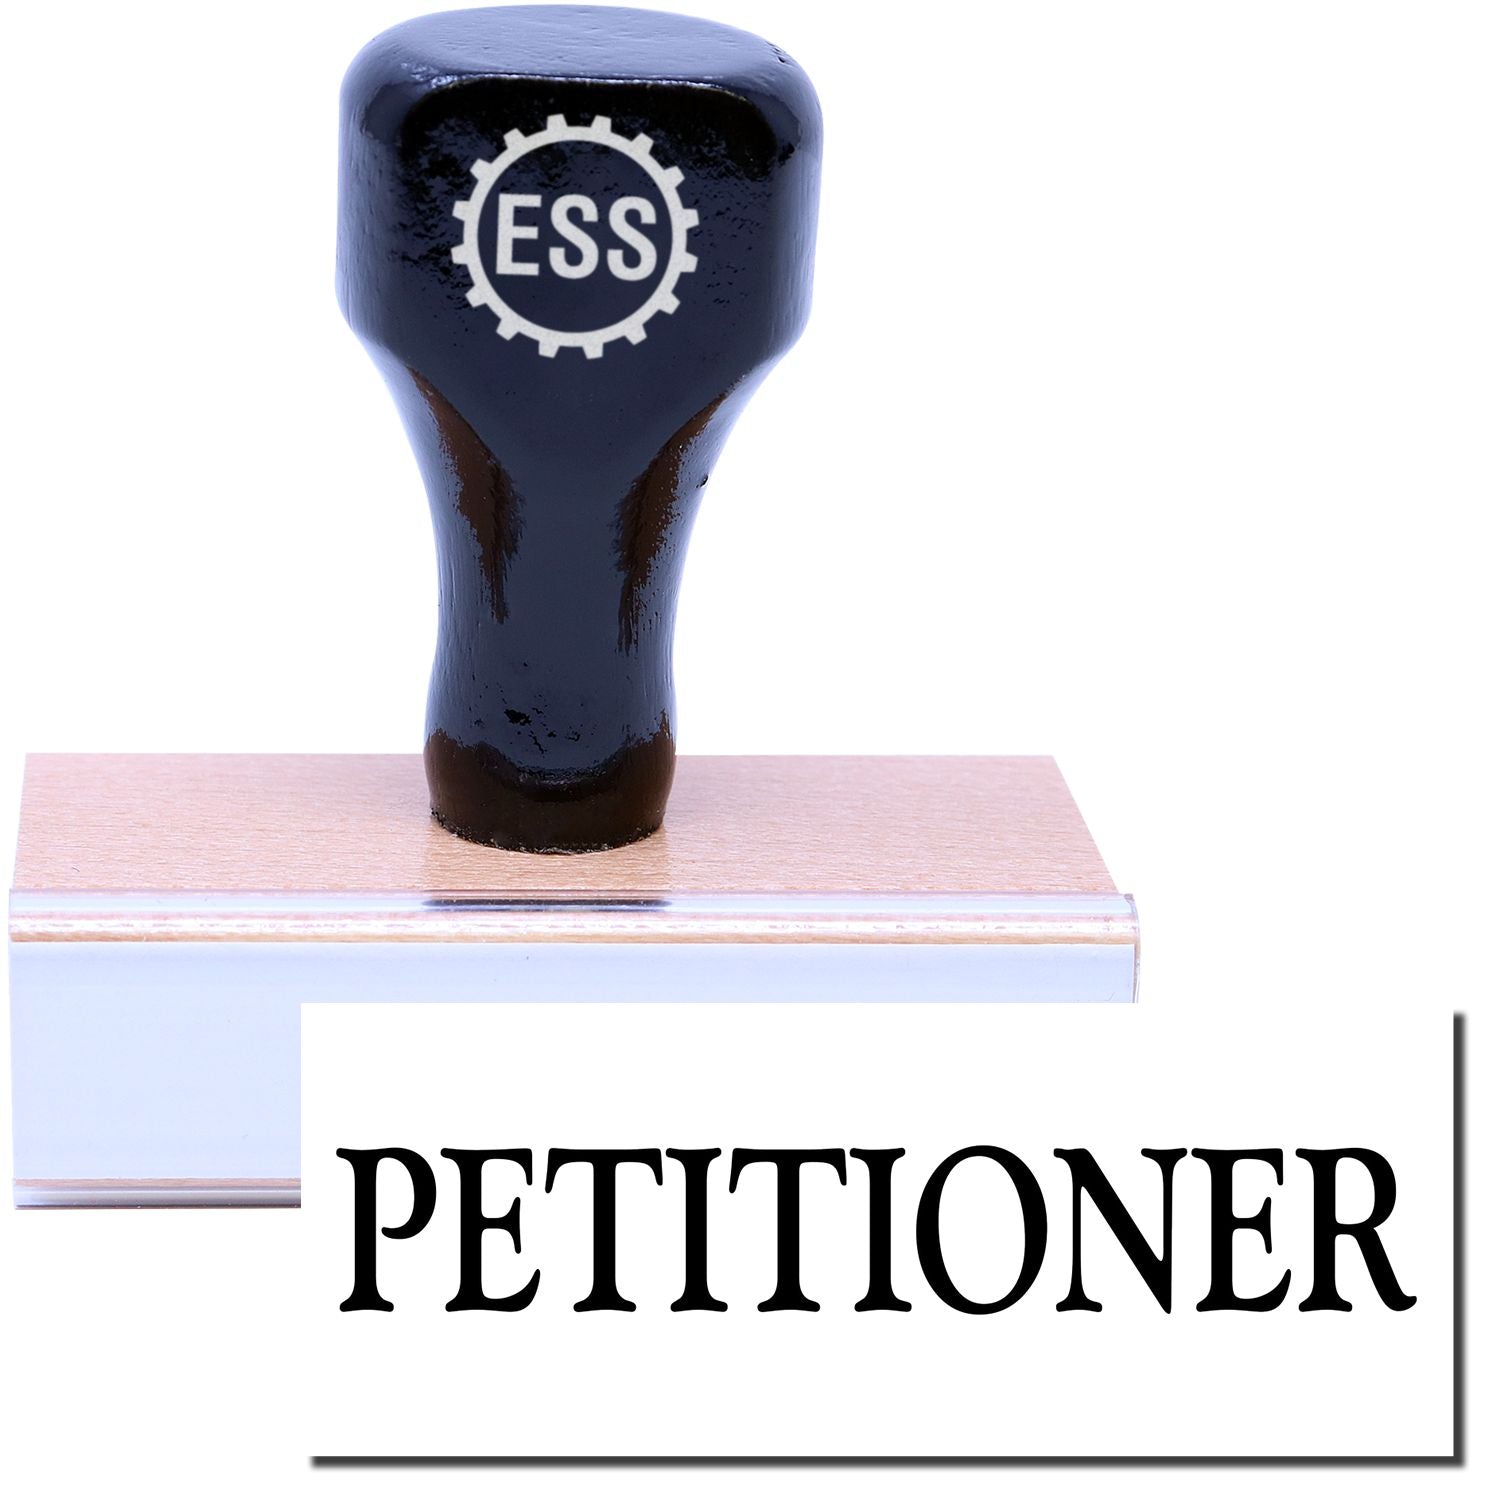 A stock office rubber stamp with a stamped image showing how the text "PETITIONER" in a large font is displayed after stamping.